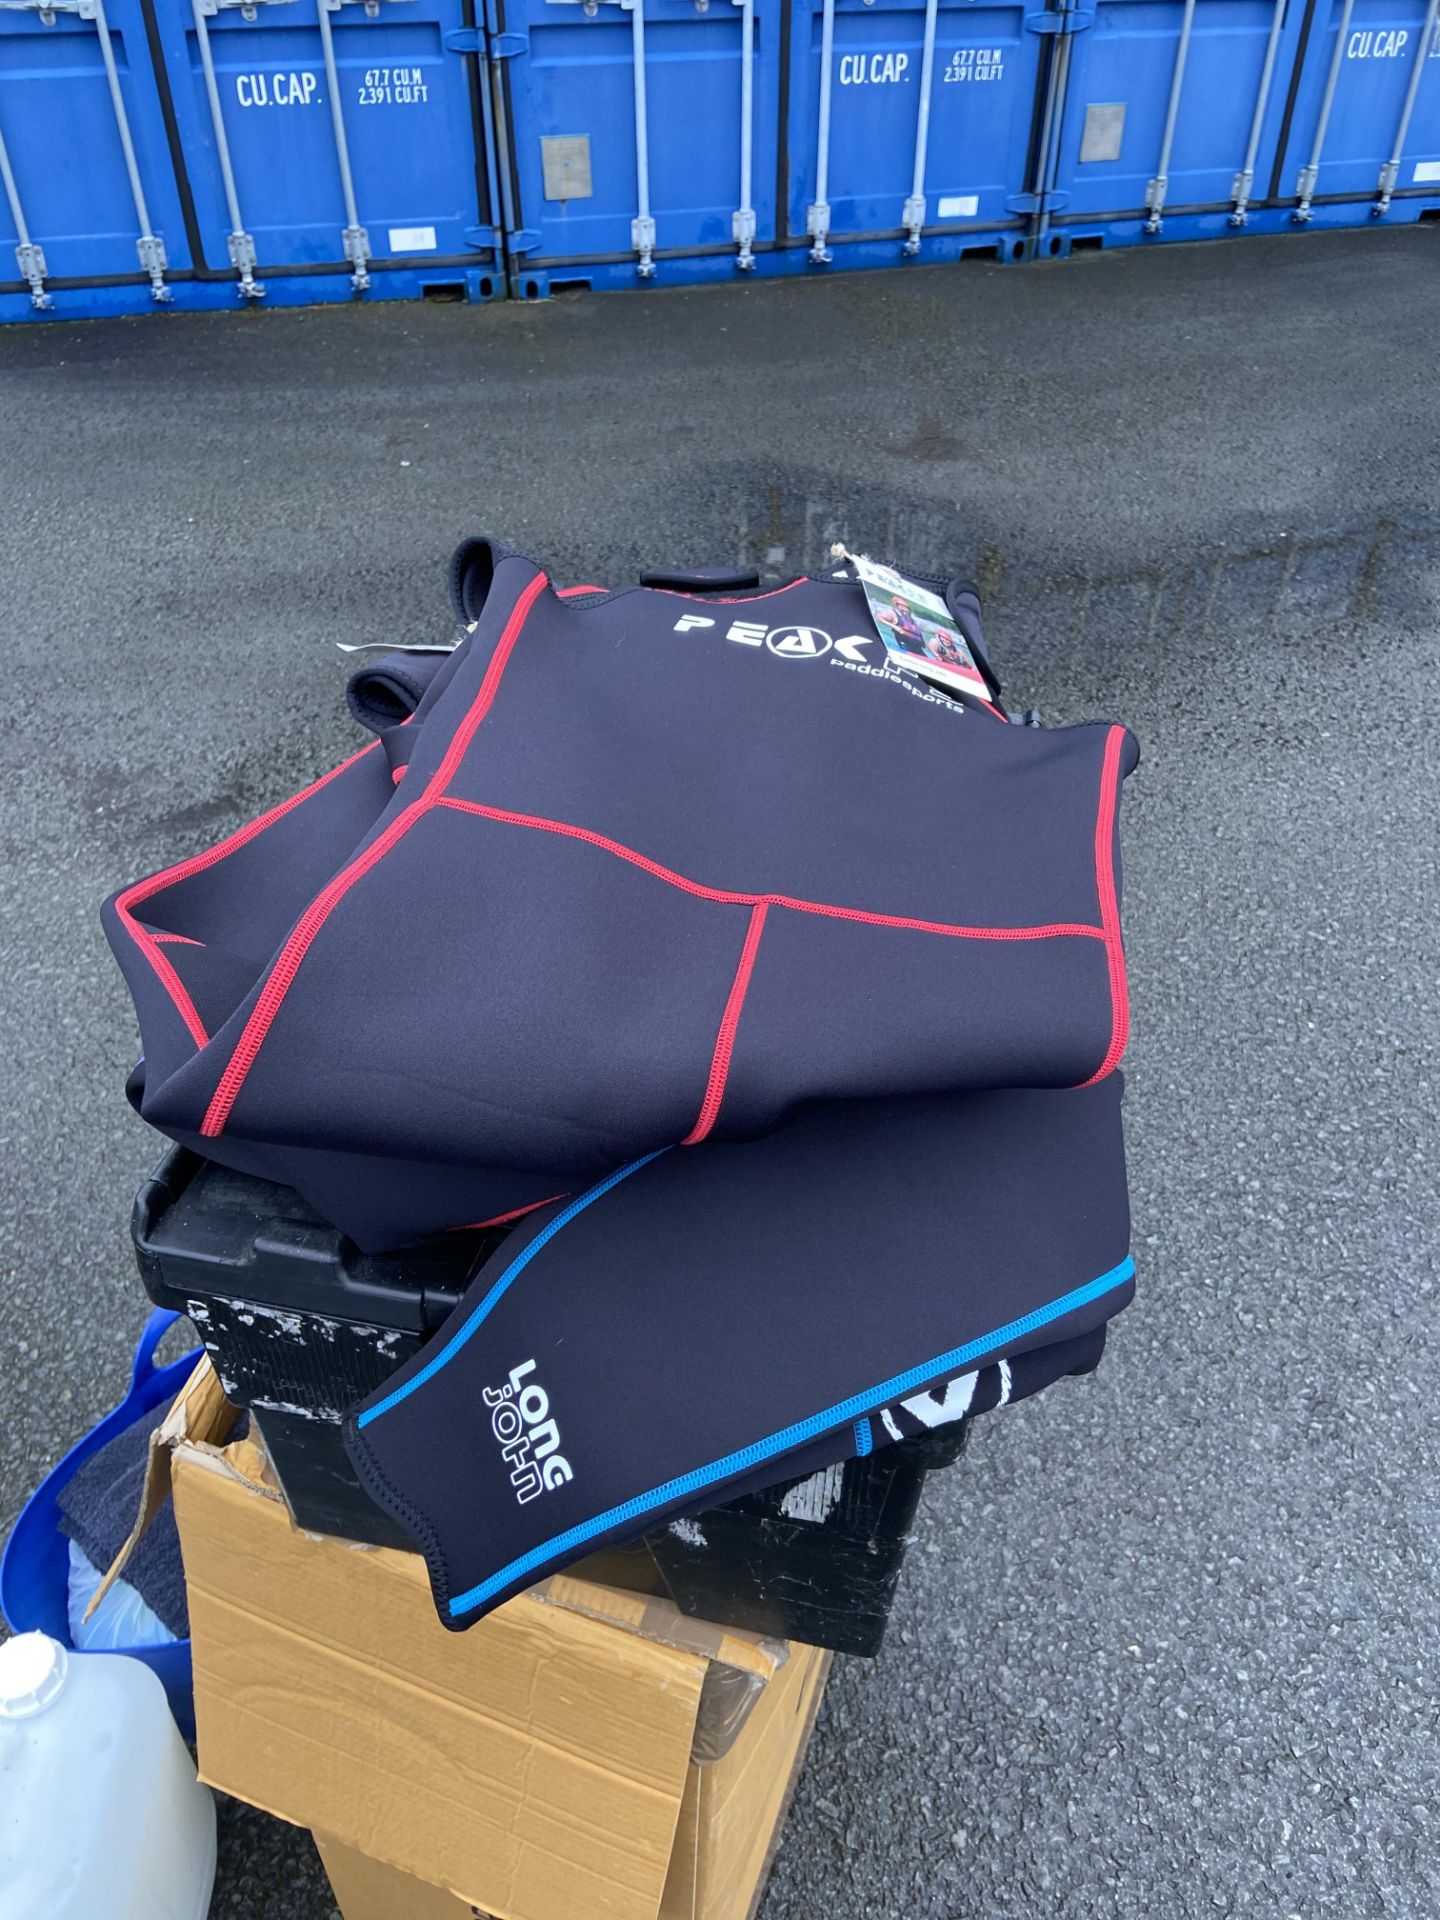 Four Janga Riot Wet Suits & Four Peak UK Sleeveless Long John Wetsuits, with plastic crate Please - Image 2 of 3